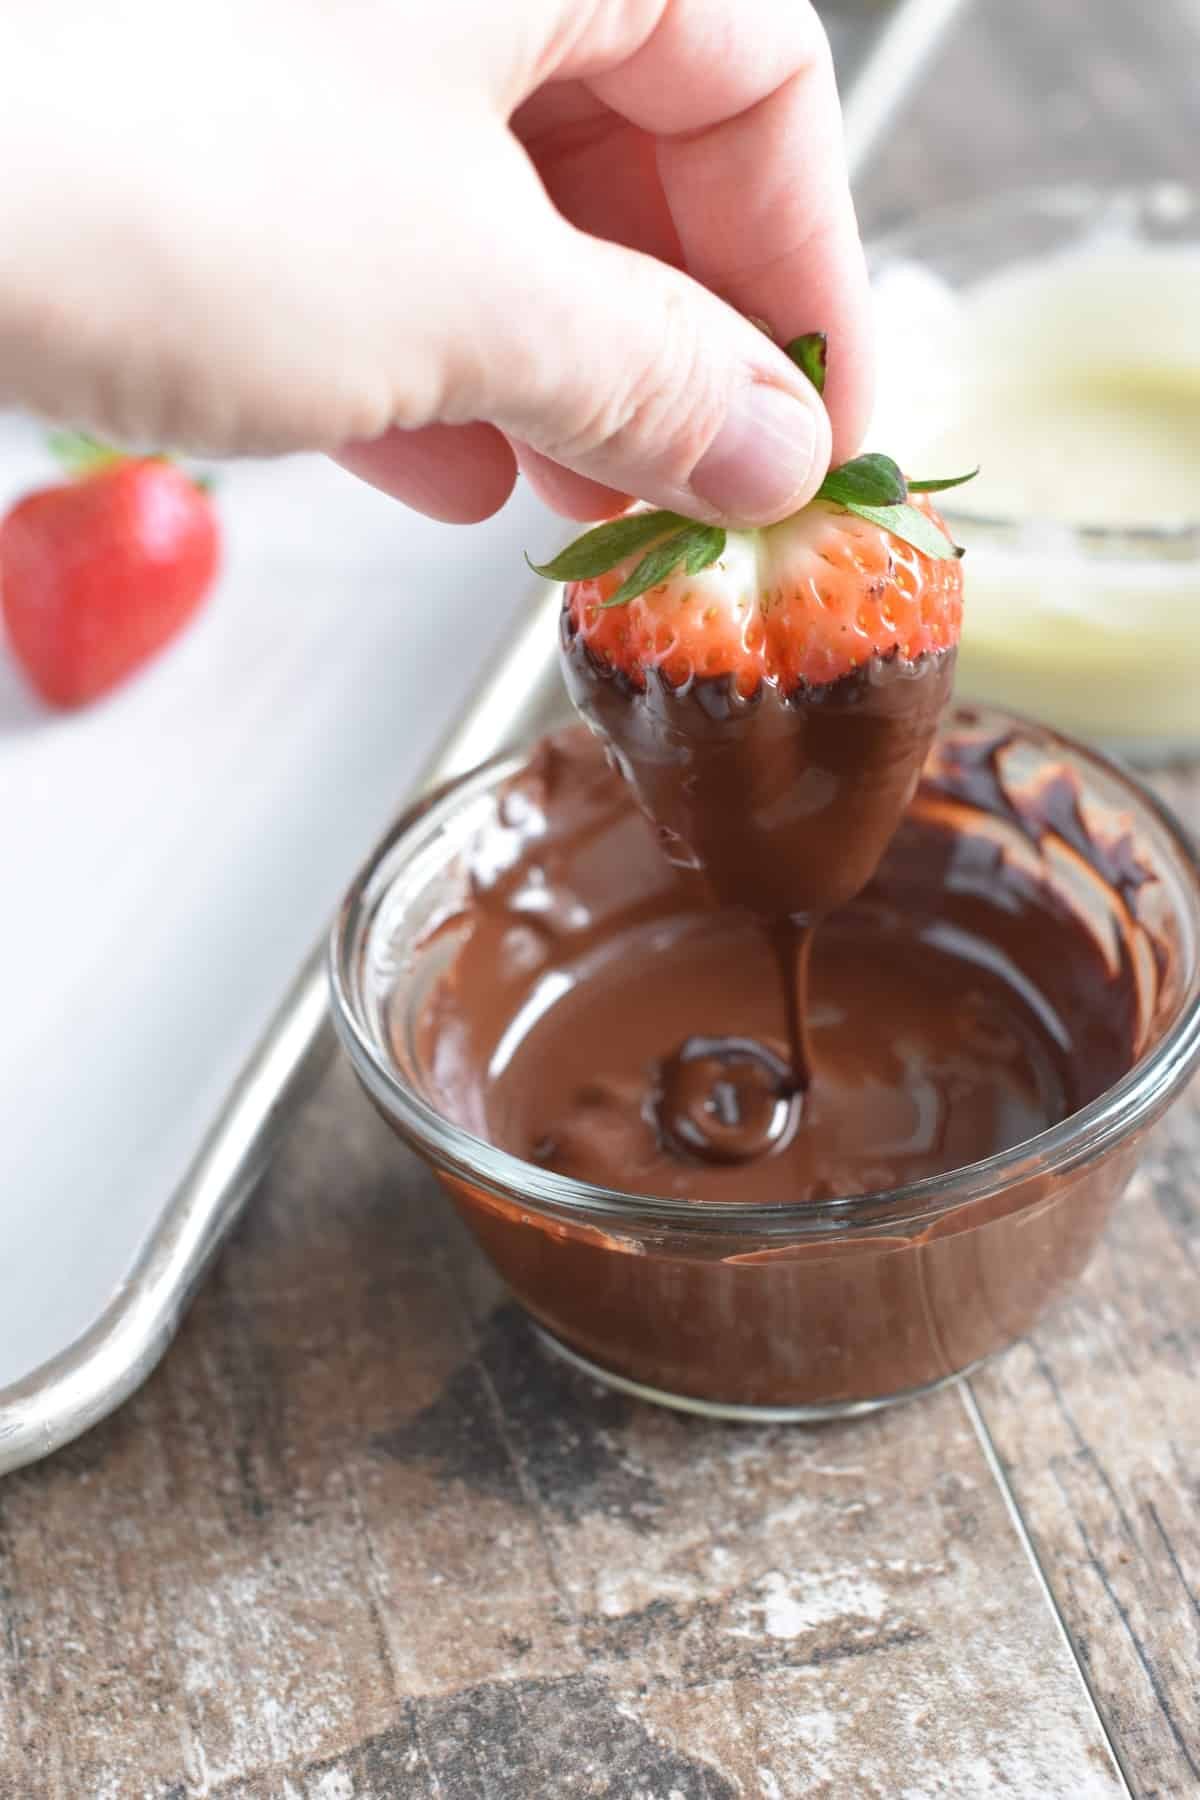 Dipping a strawberry into melted dark chocolate